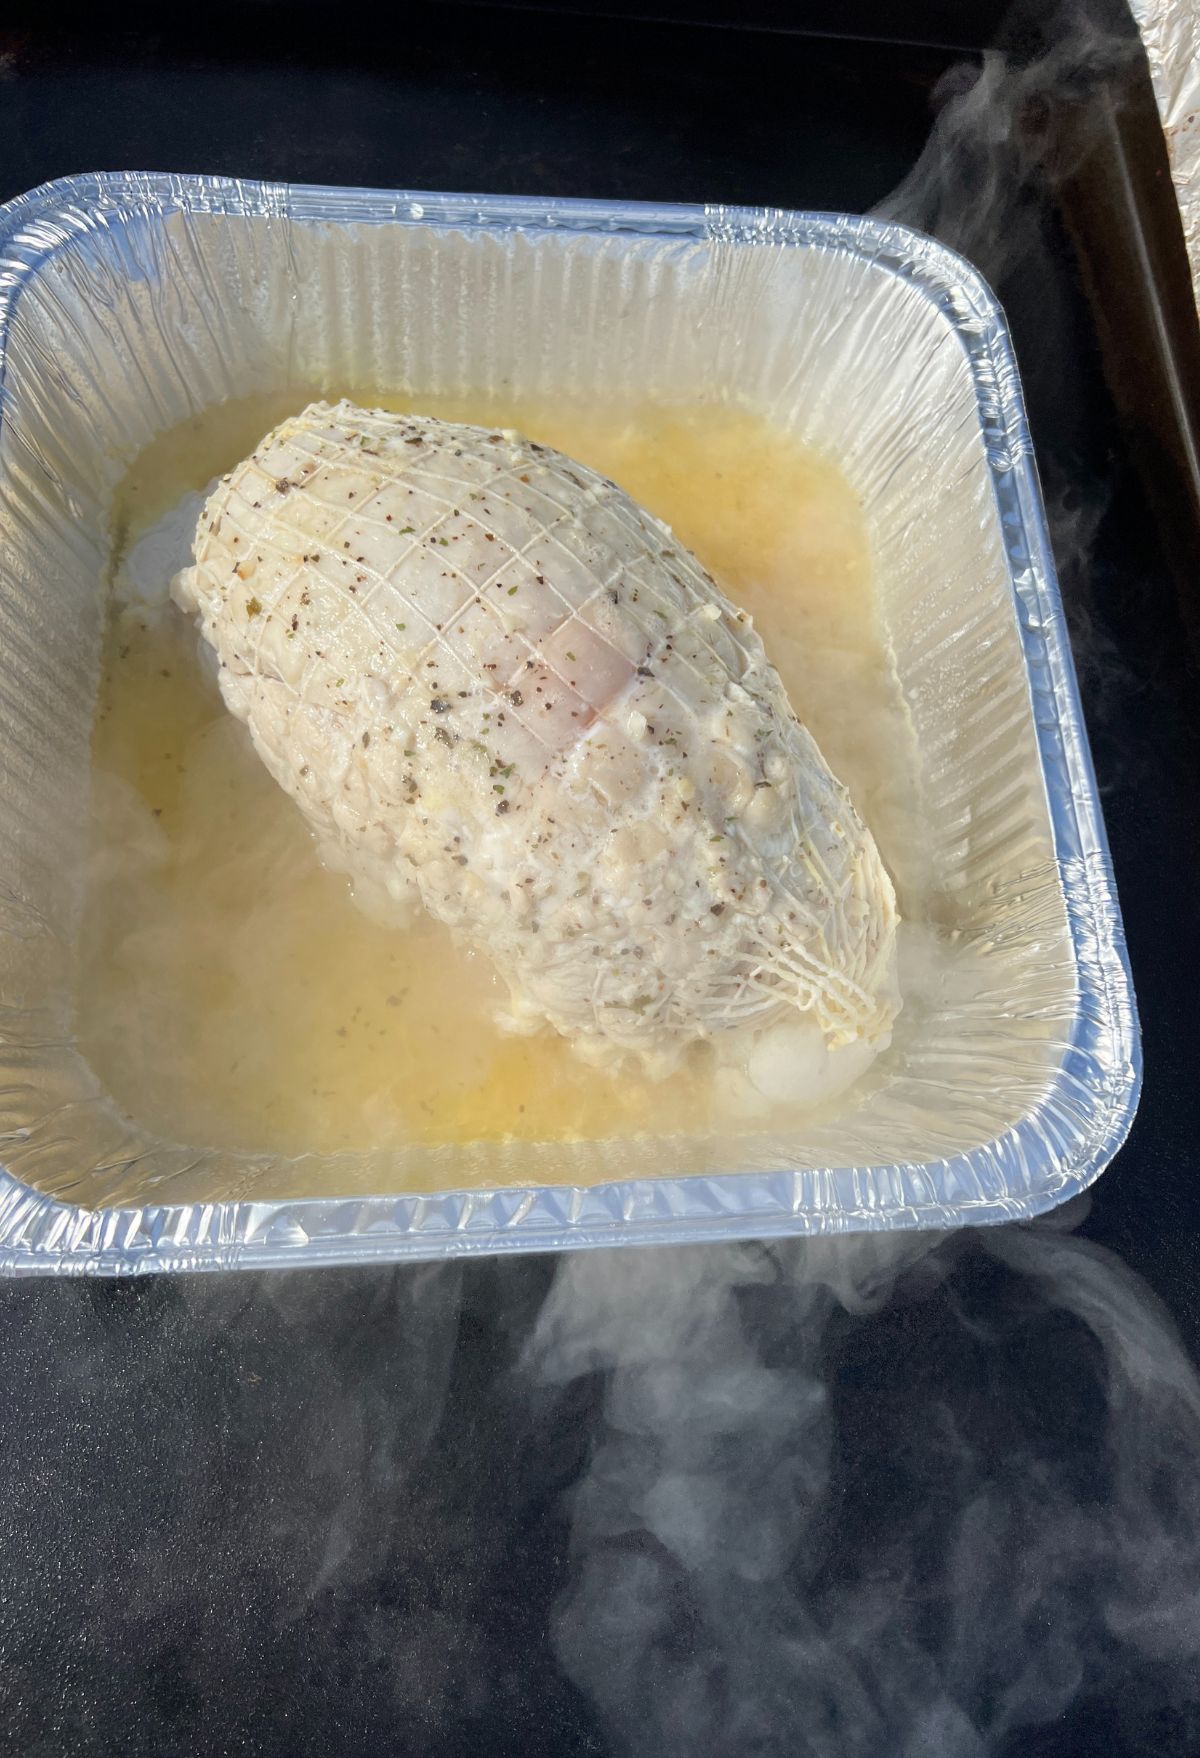 A chicken in a plastic container with steam coming out of it.